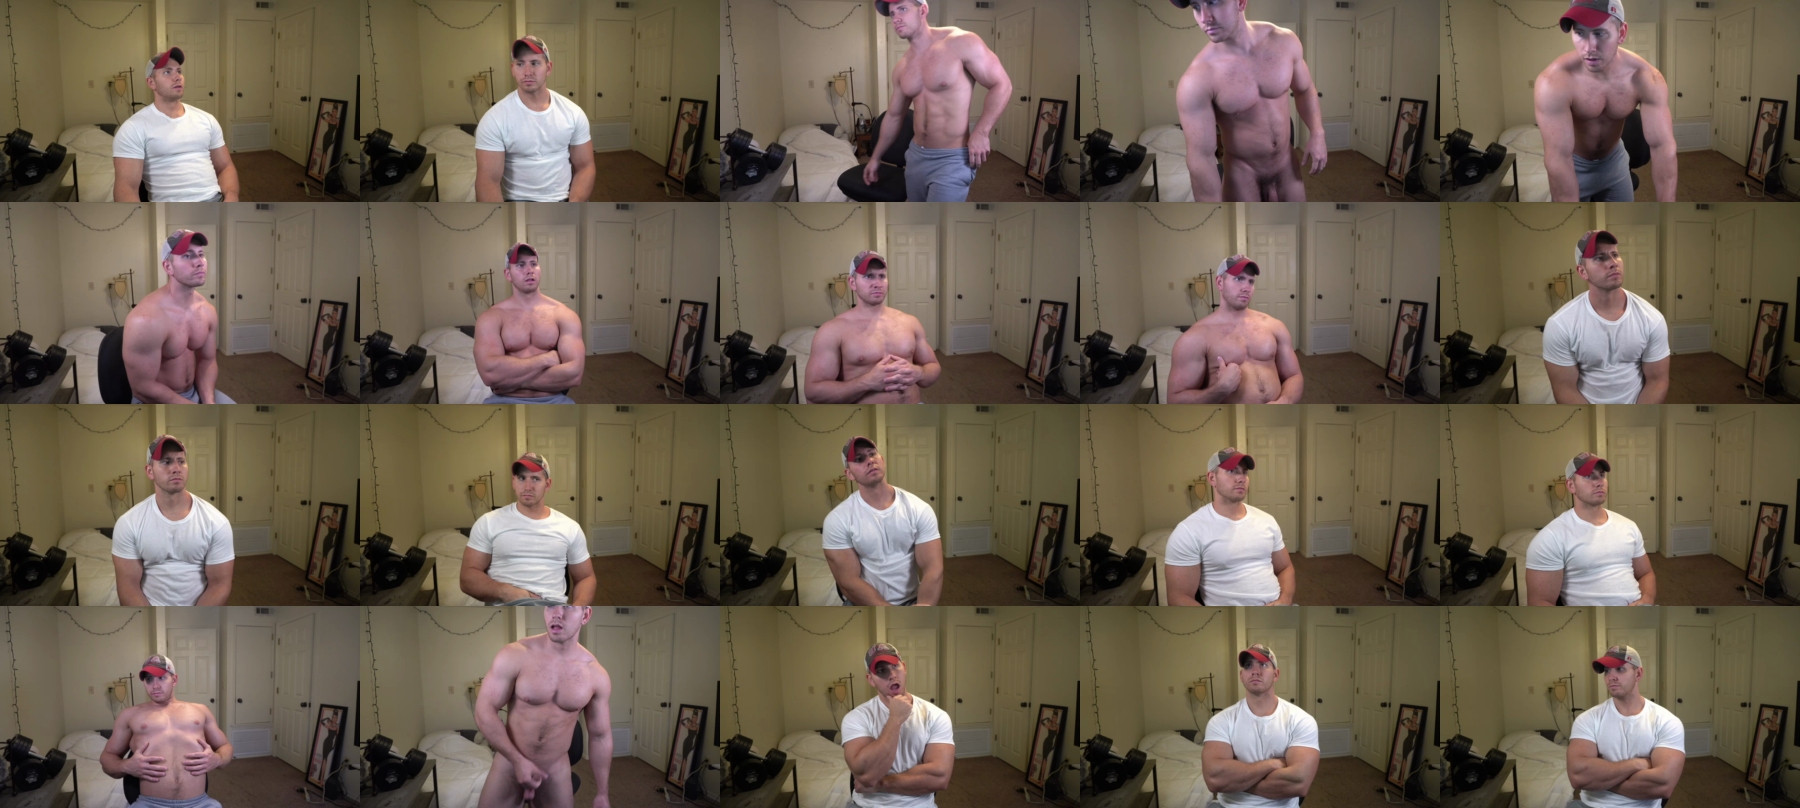 Hotmuscles6t9 Recorded CAM SHOW @ Chaturbate 28-04-2021